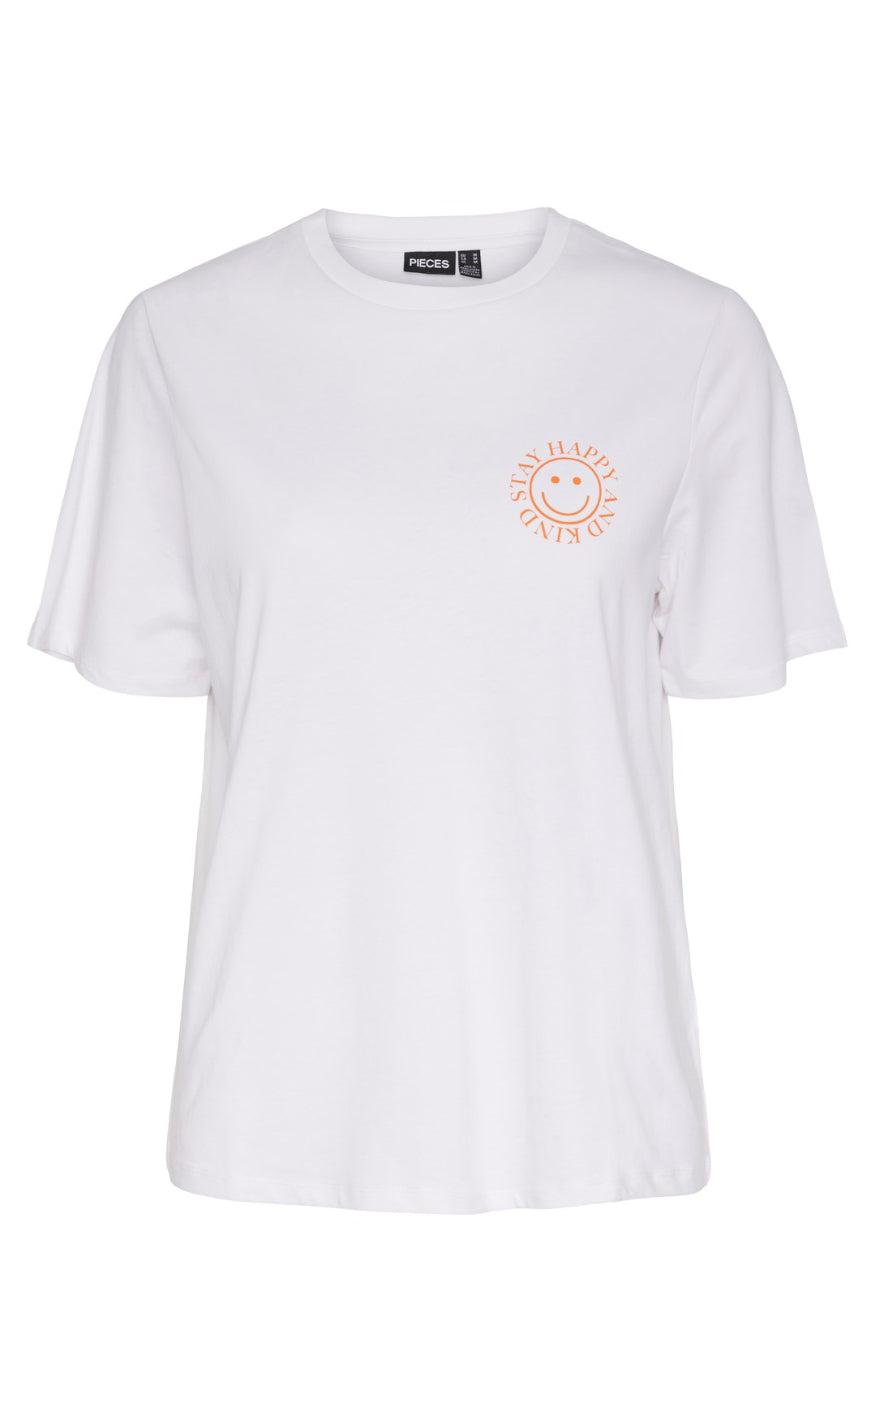 Billede af PIECES T-Shirt - Molly - Bright White